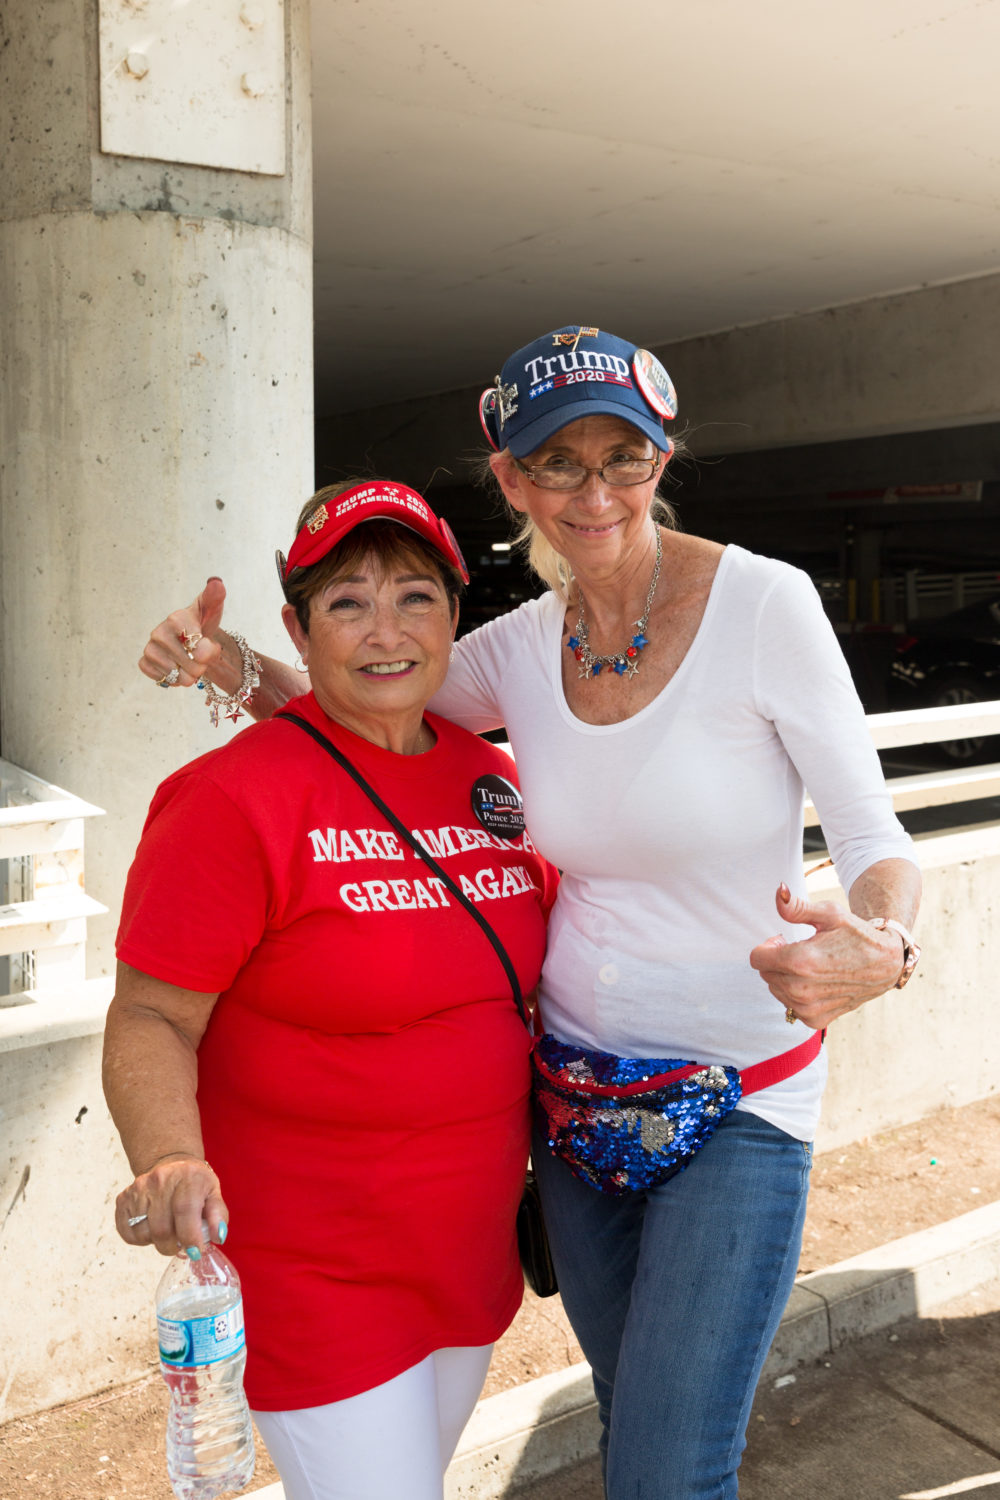 "We love Trump!" Dolores Scardine and Barbara Bergdall shouted in unison. (Rachael Banks for Here & Now)